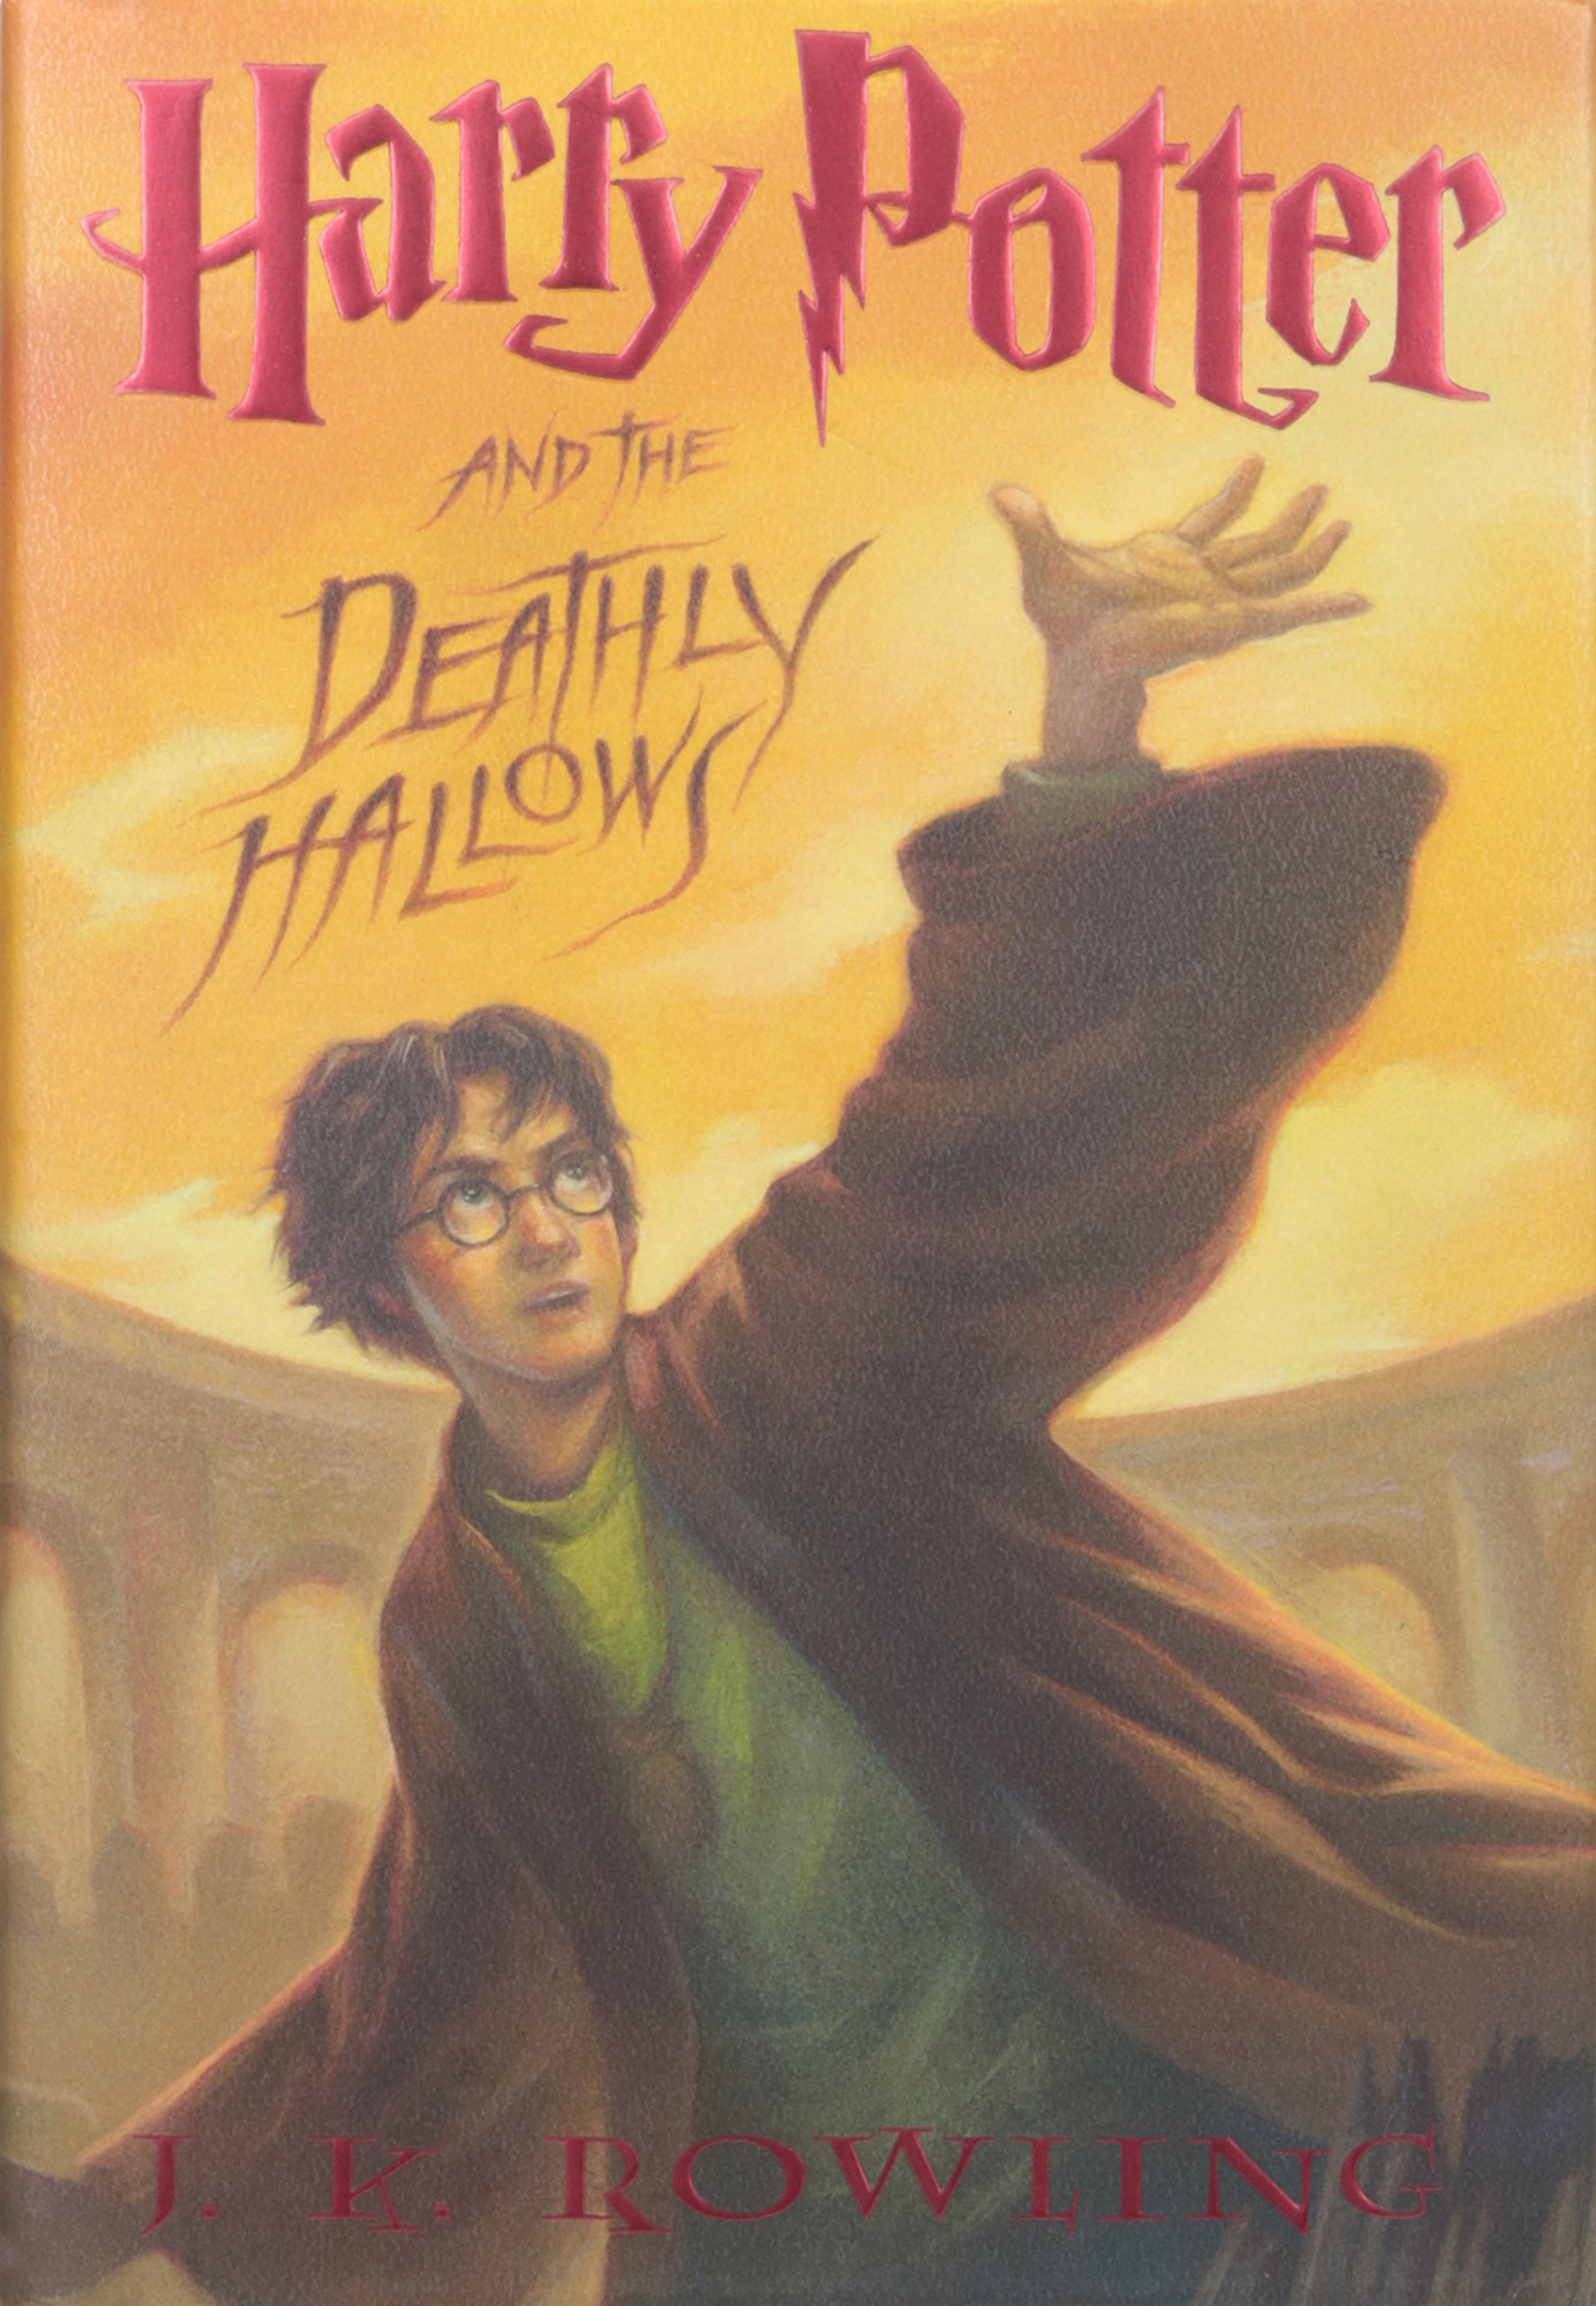 Harry Potter and the Half Blood PrinceHarry Potter and the Deathly Hallows